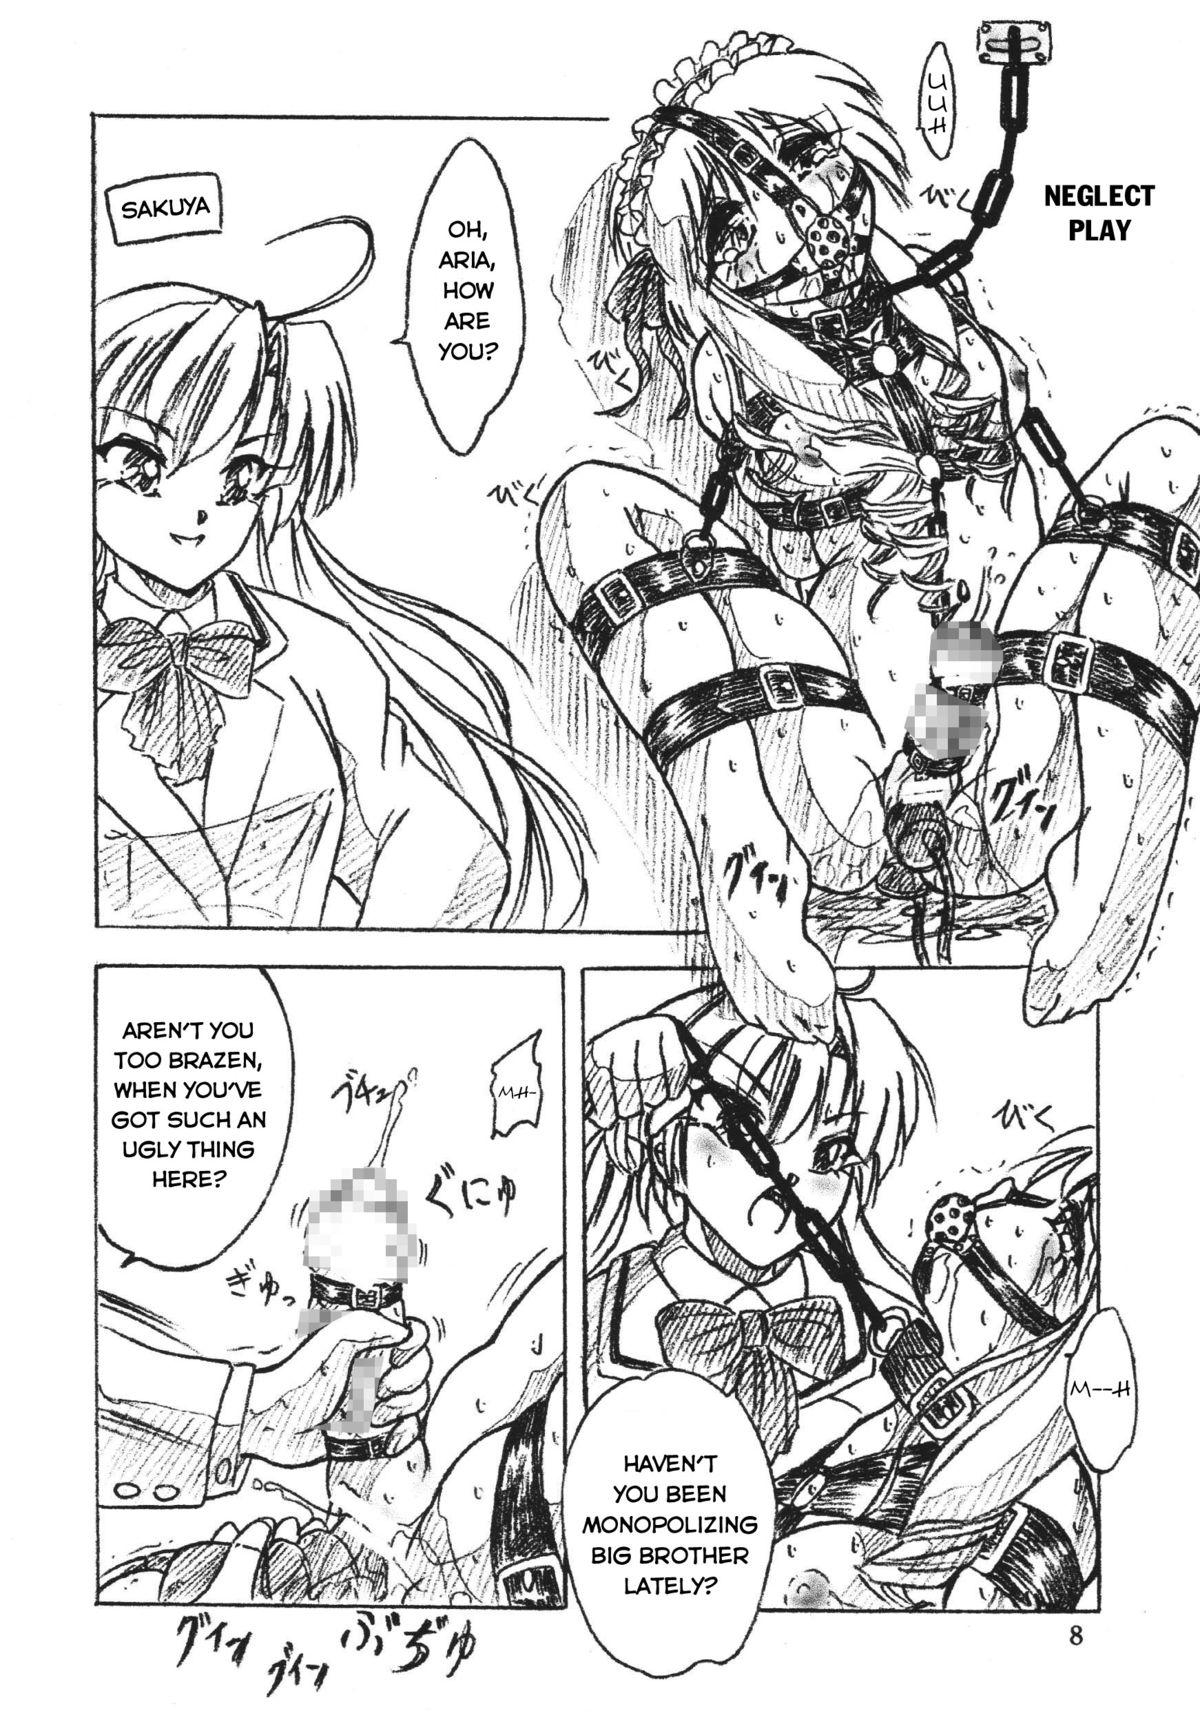 Sex Massage Majo Gari | Witch Hunt - Chobits Tokyo mew mew Muscles - Page 8